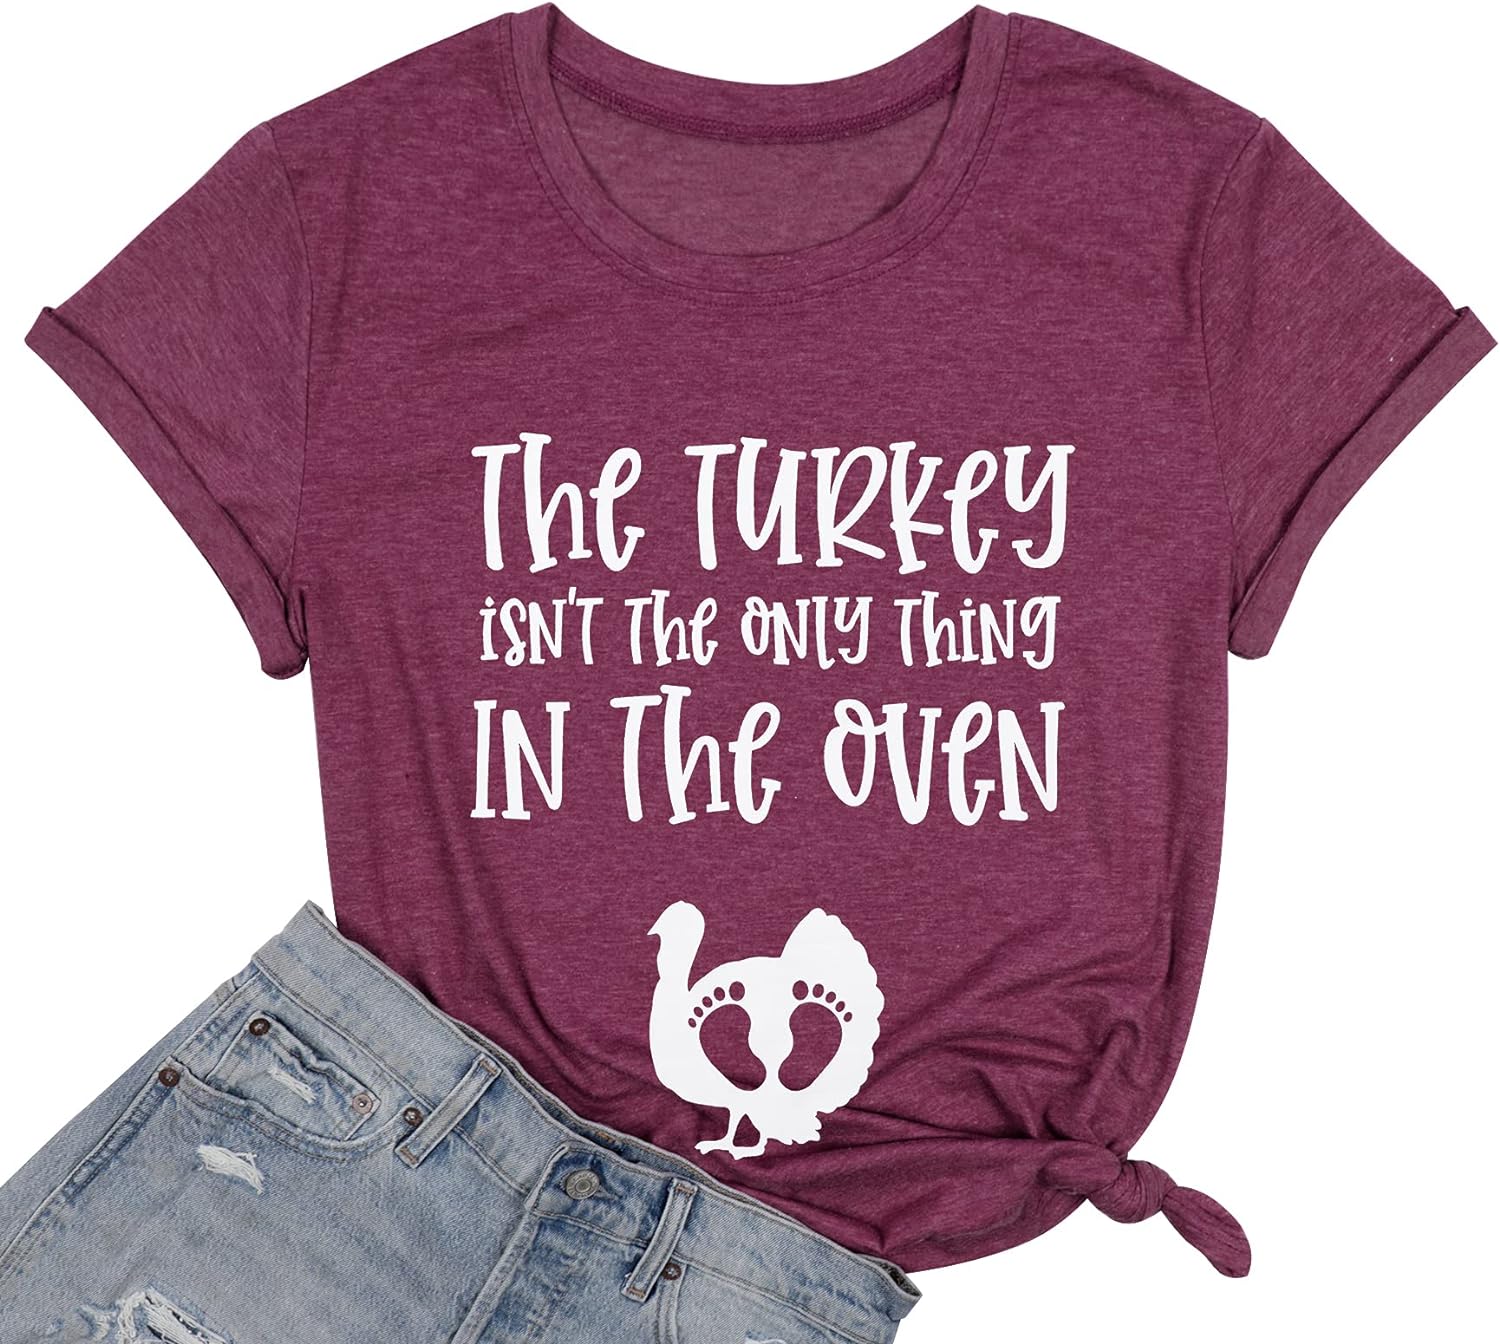 Thanksgiving Pregnant T Shirt Women The Turkey Ain&#39;t The Only Thing in The Oven Shirt Maternity Funny Graphic Tops